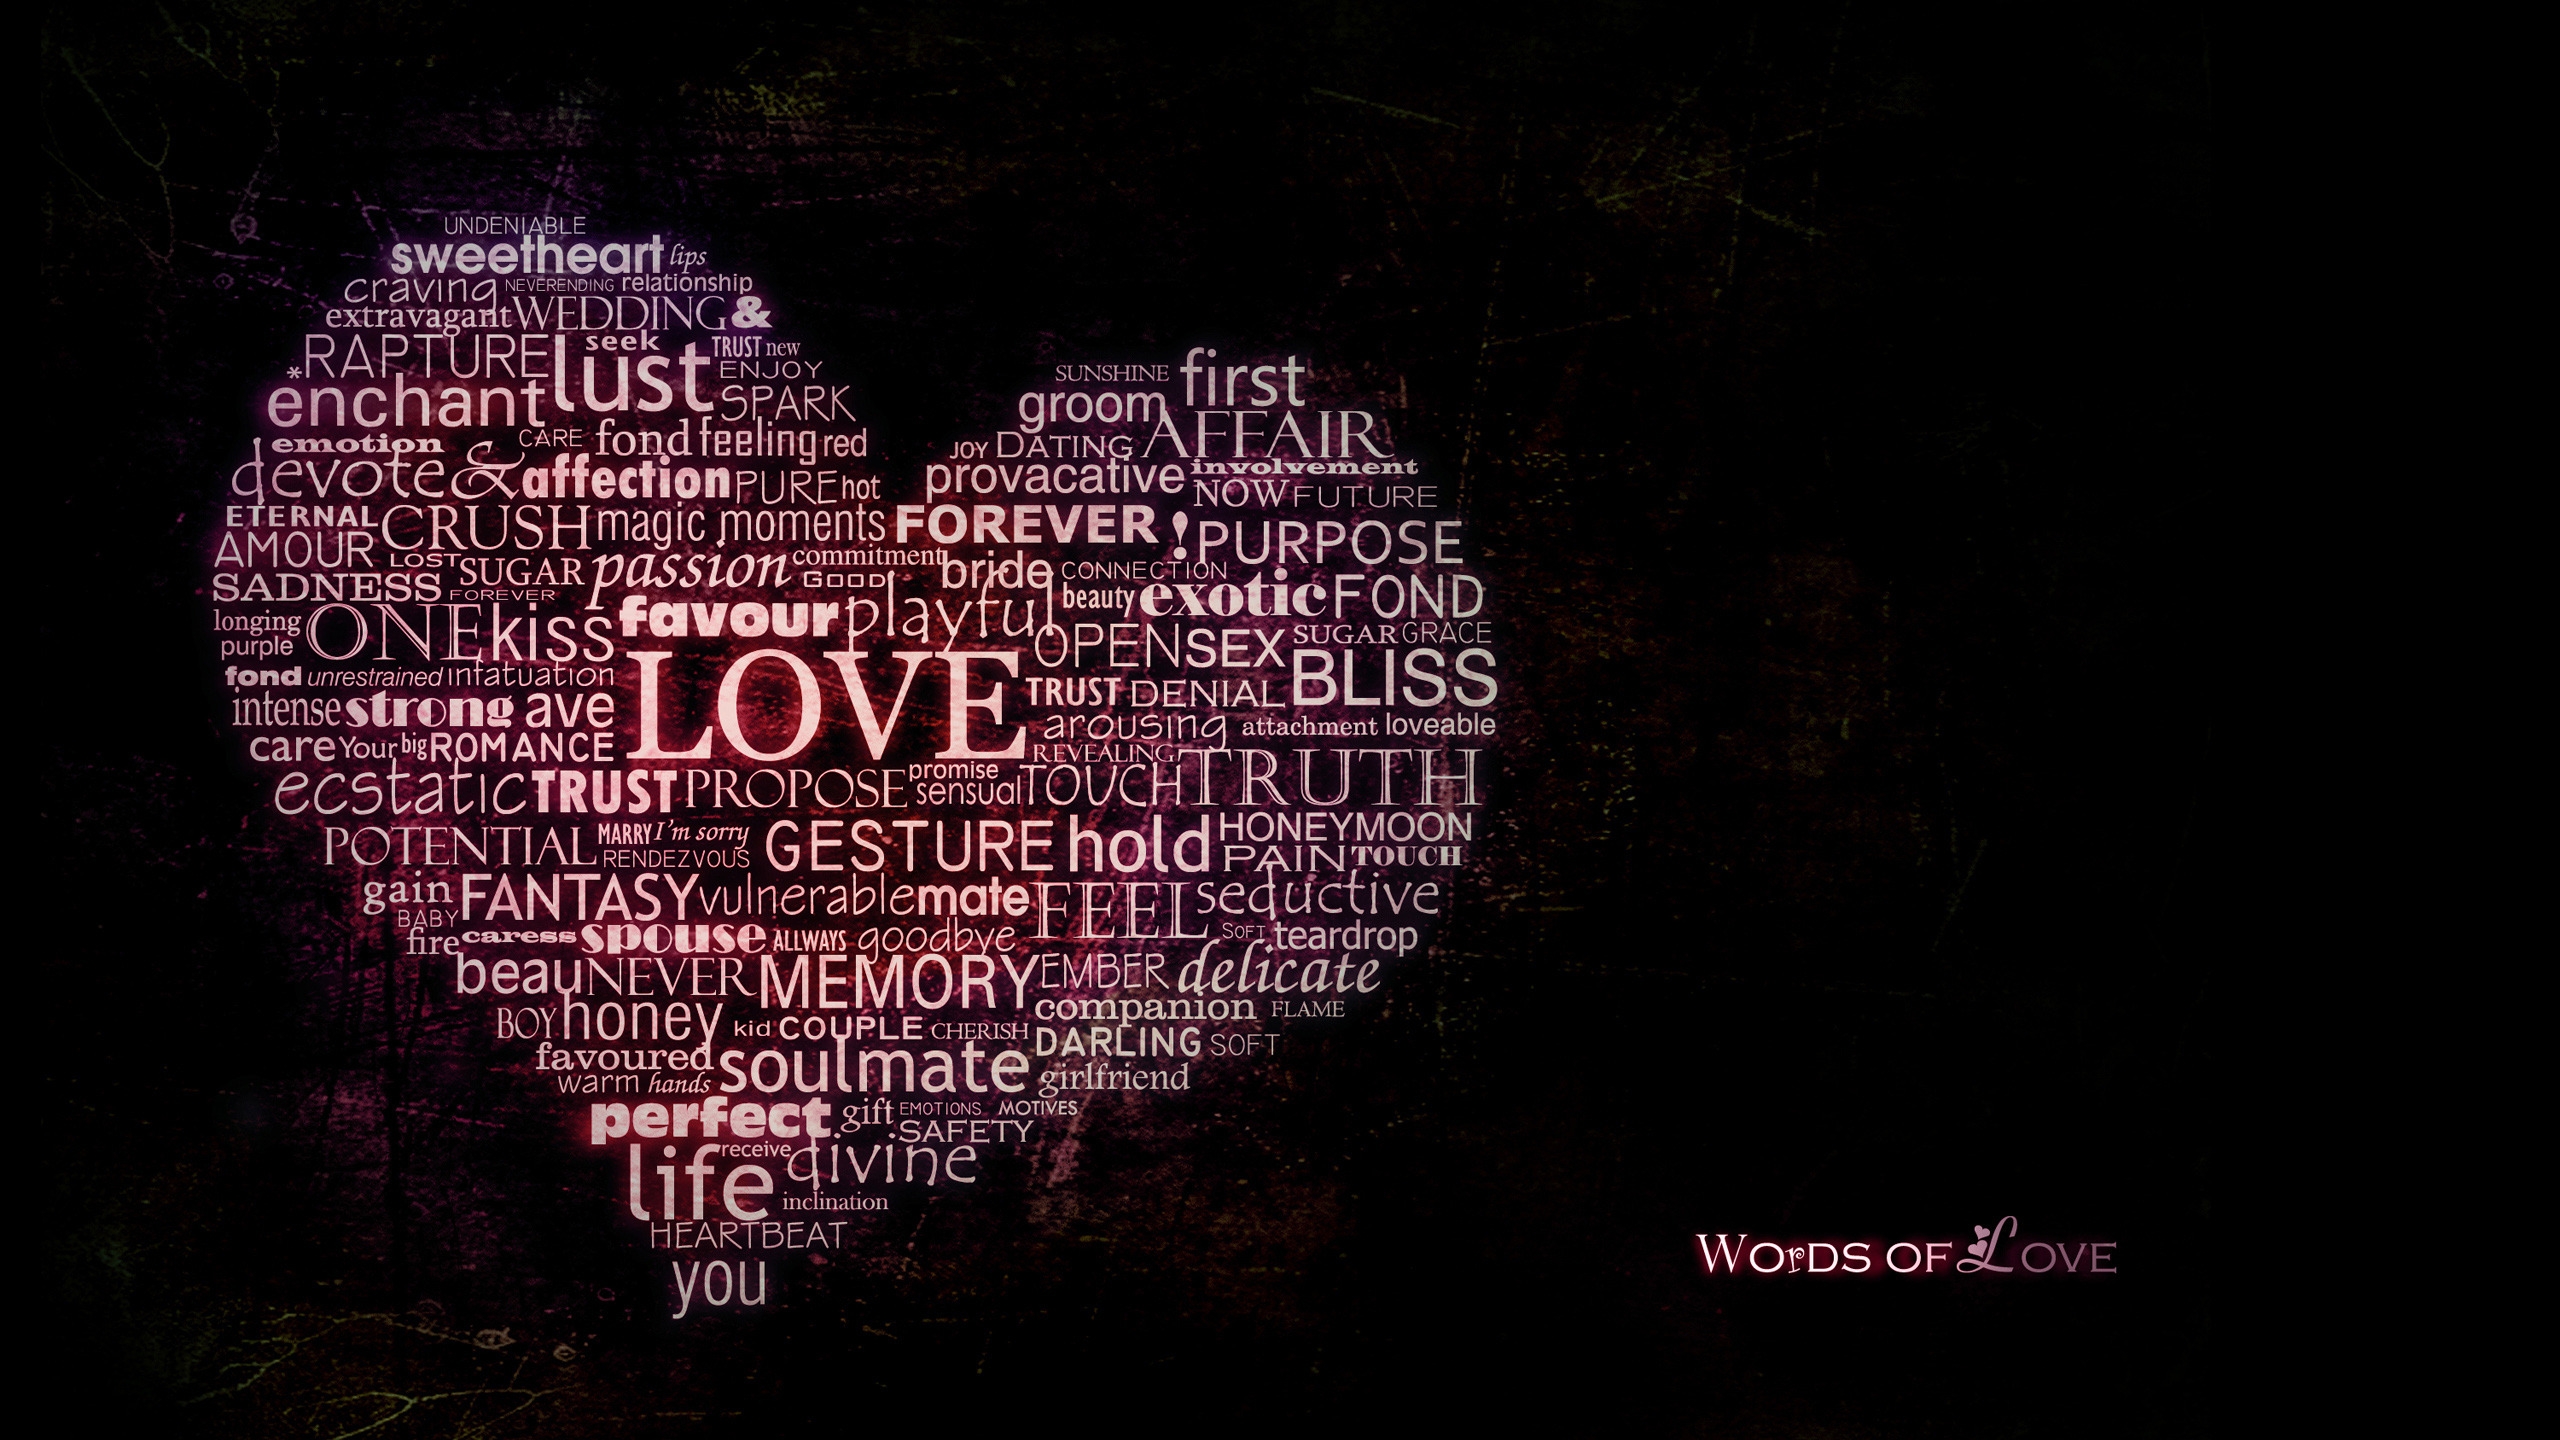 Words of Love for 2560x1440 HDTV resolution